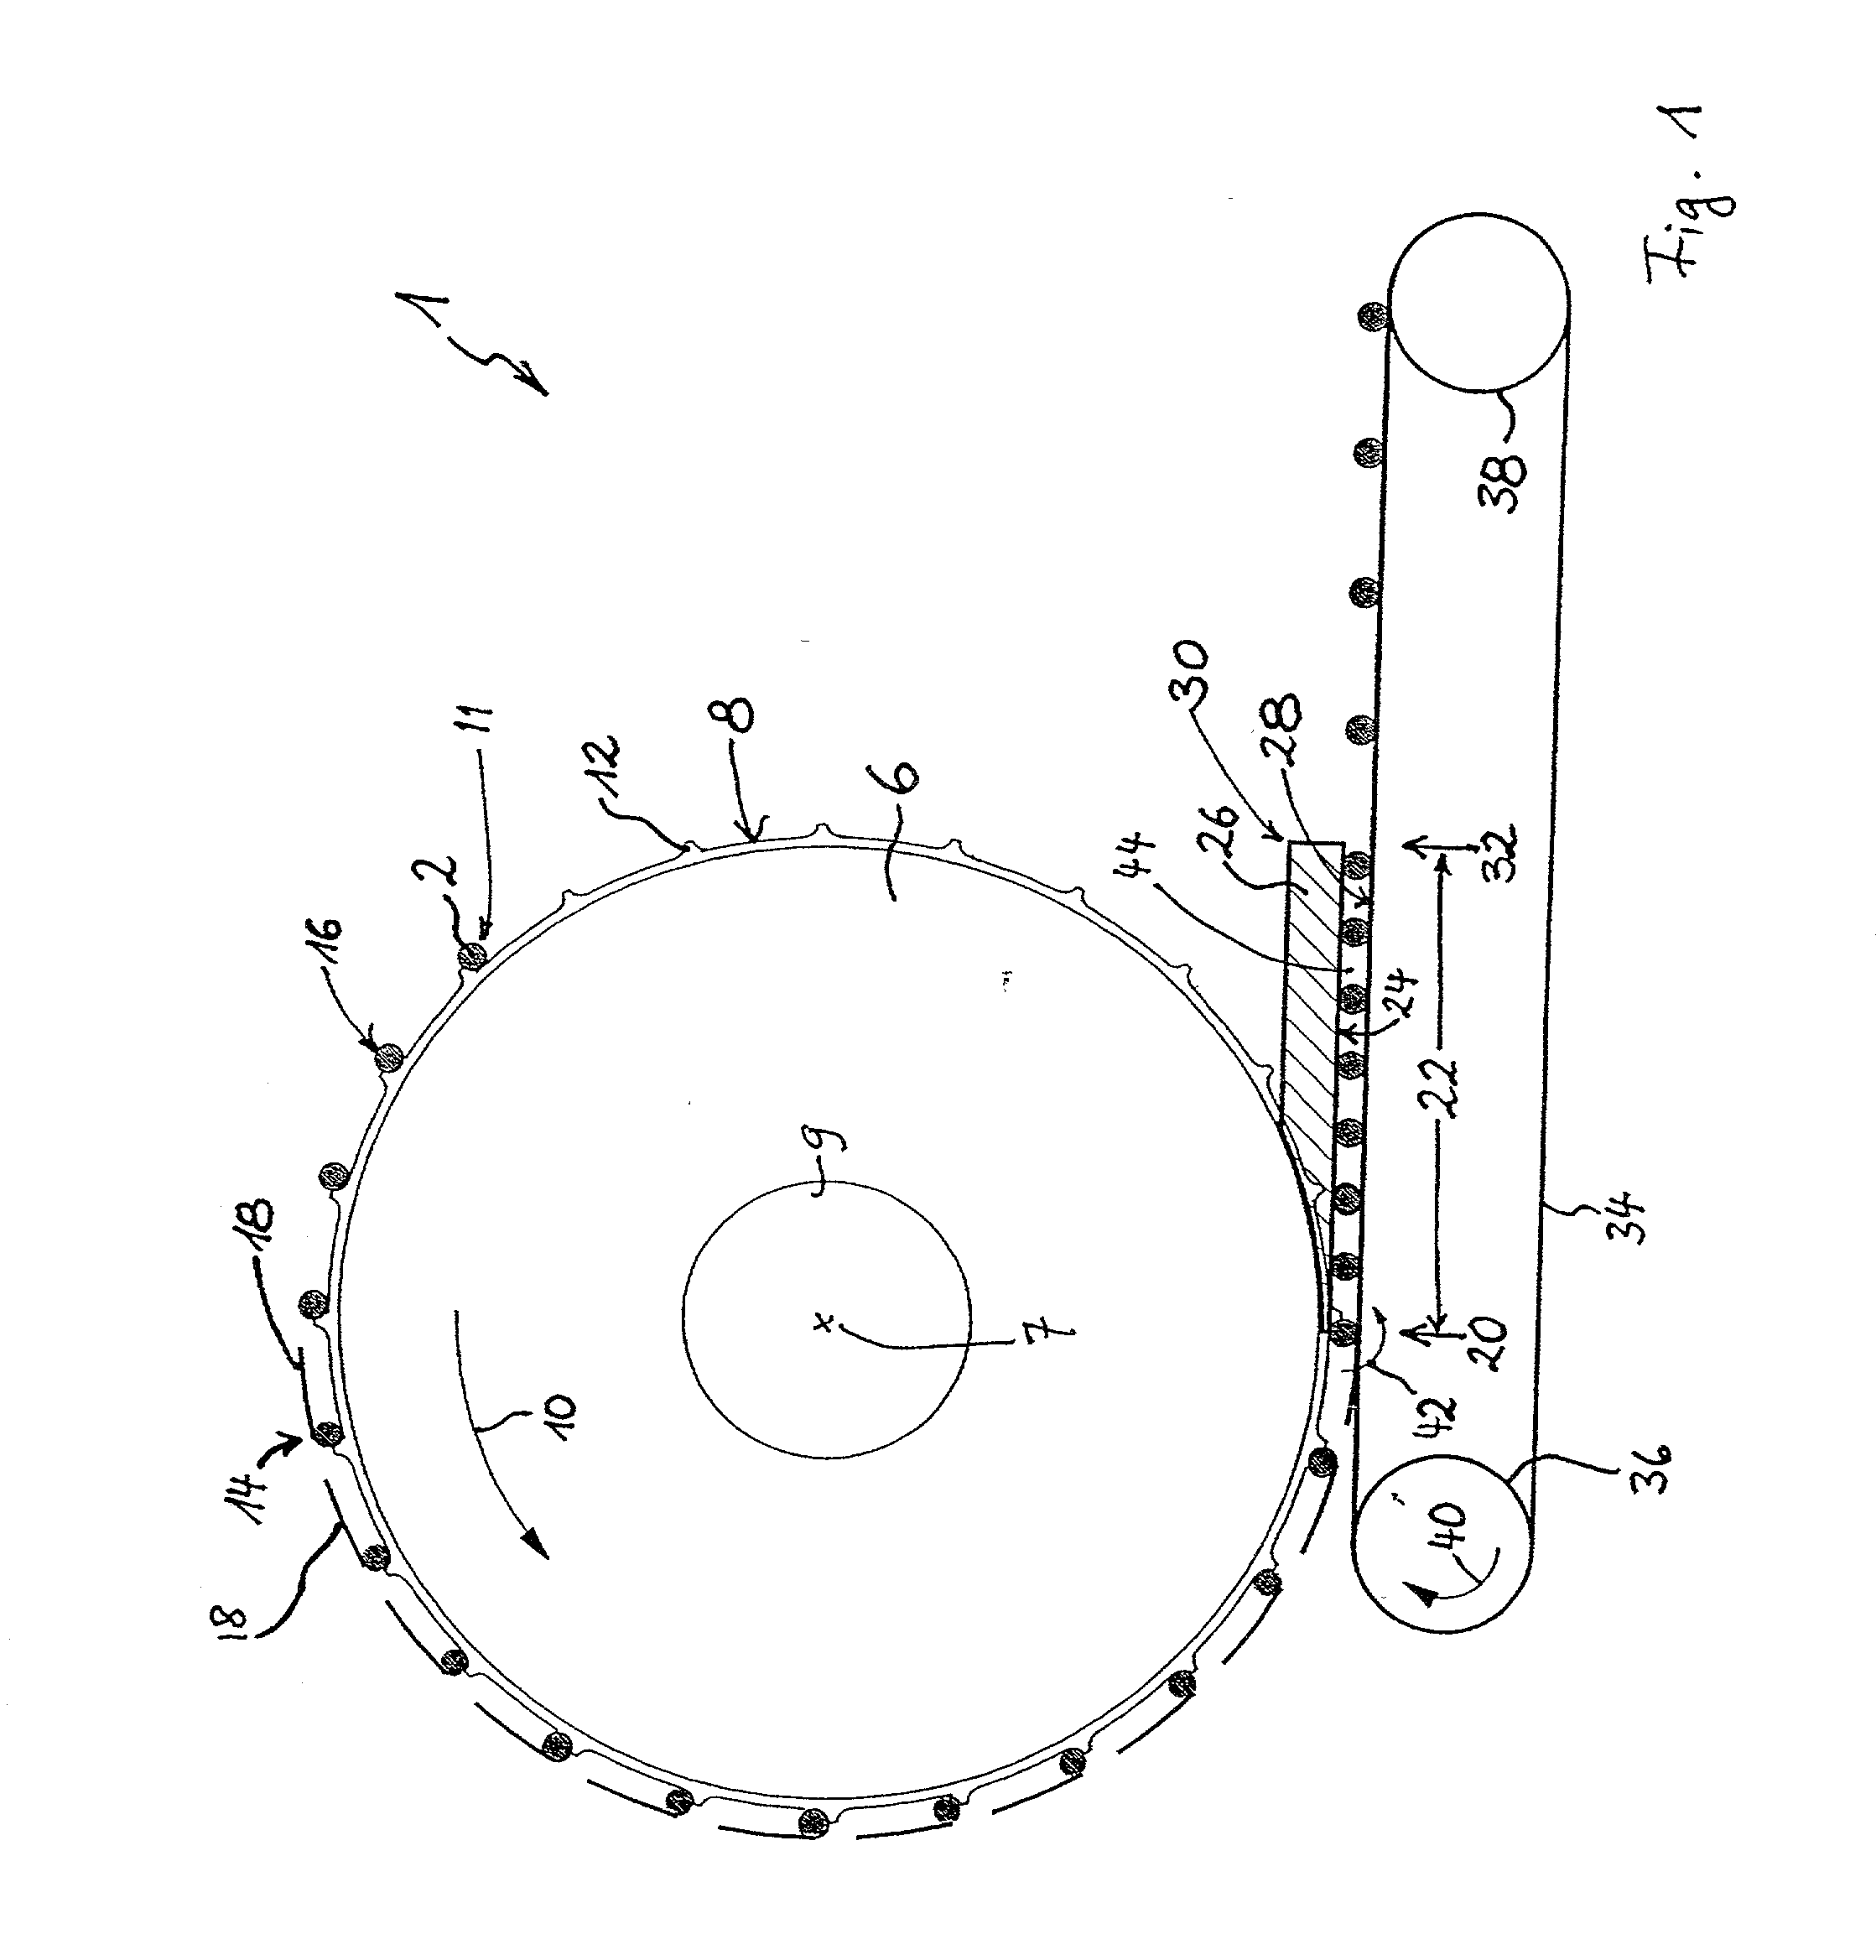 Method of and apparatus for convoluting bands around rod-shaped articles